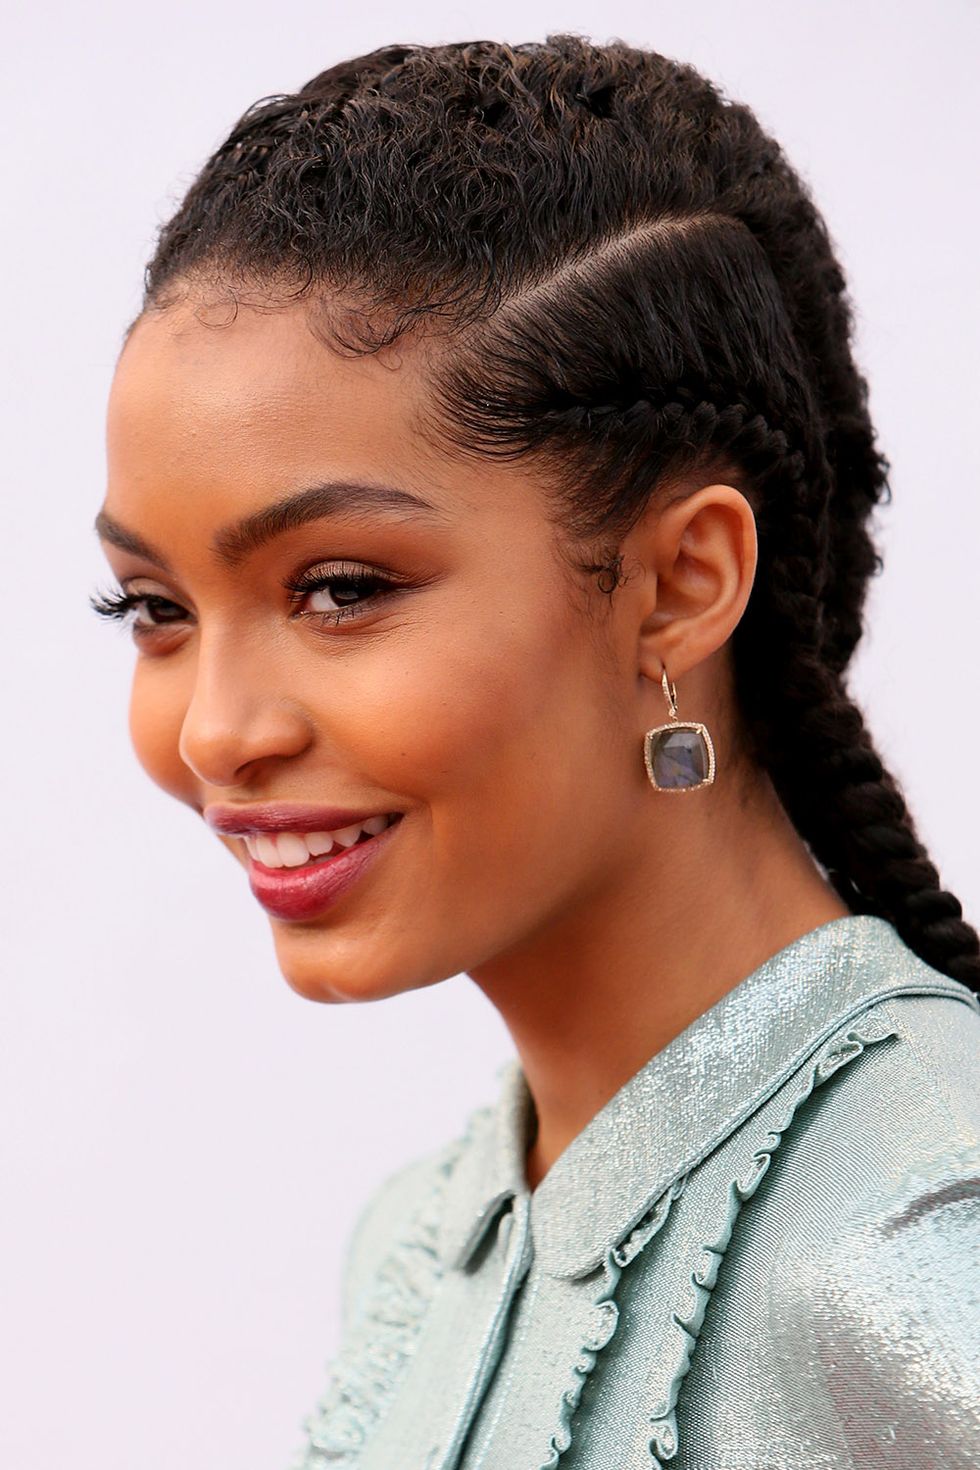 Cornrow hairstyle for natural hair